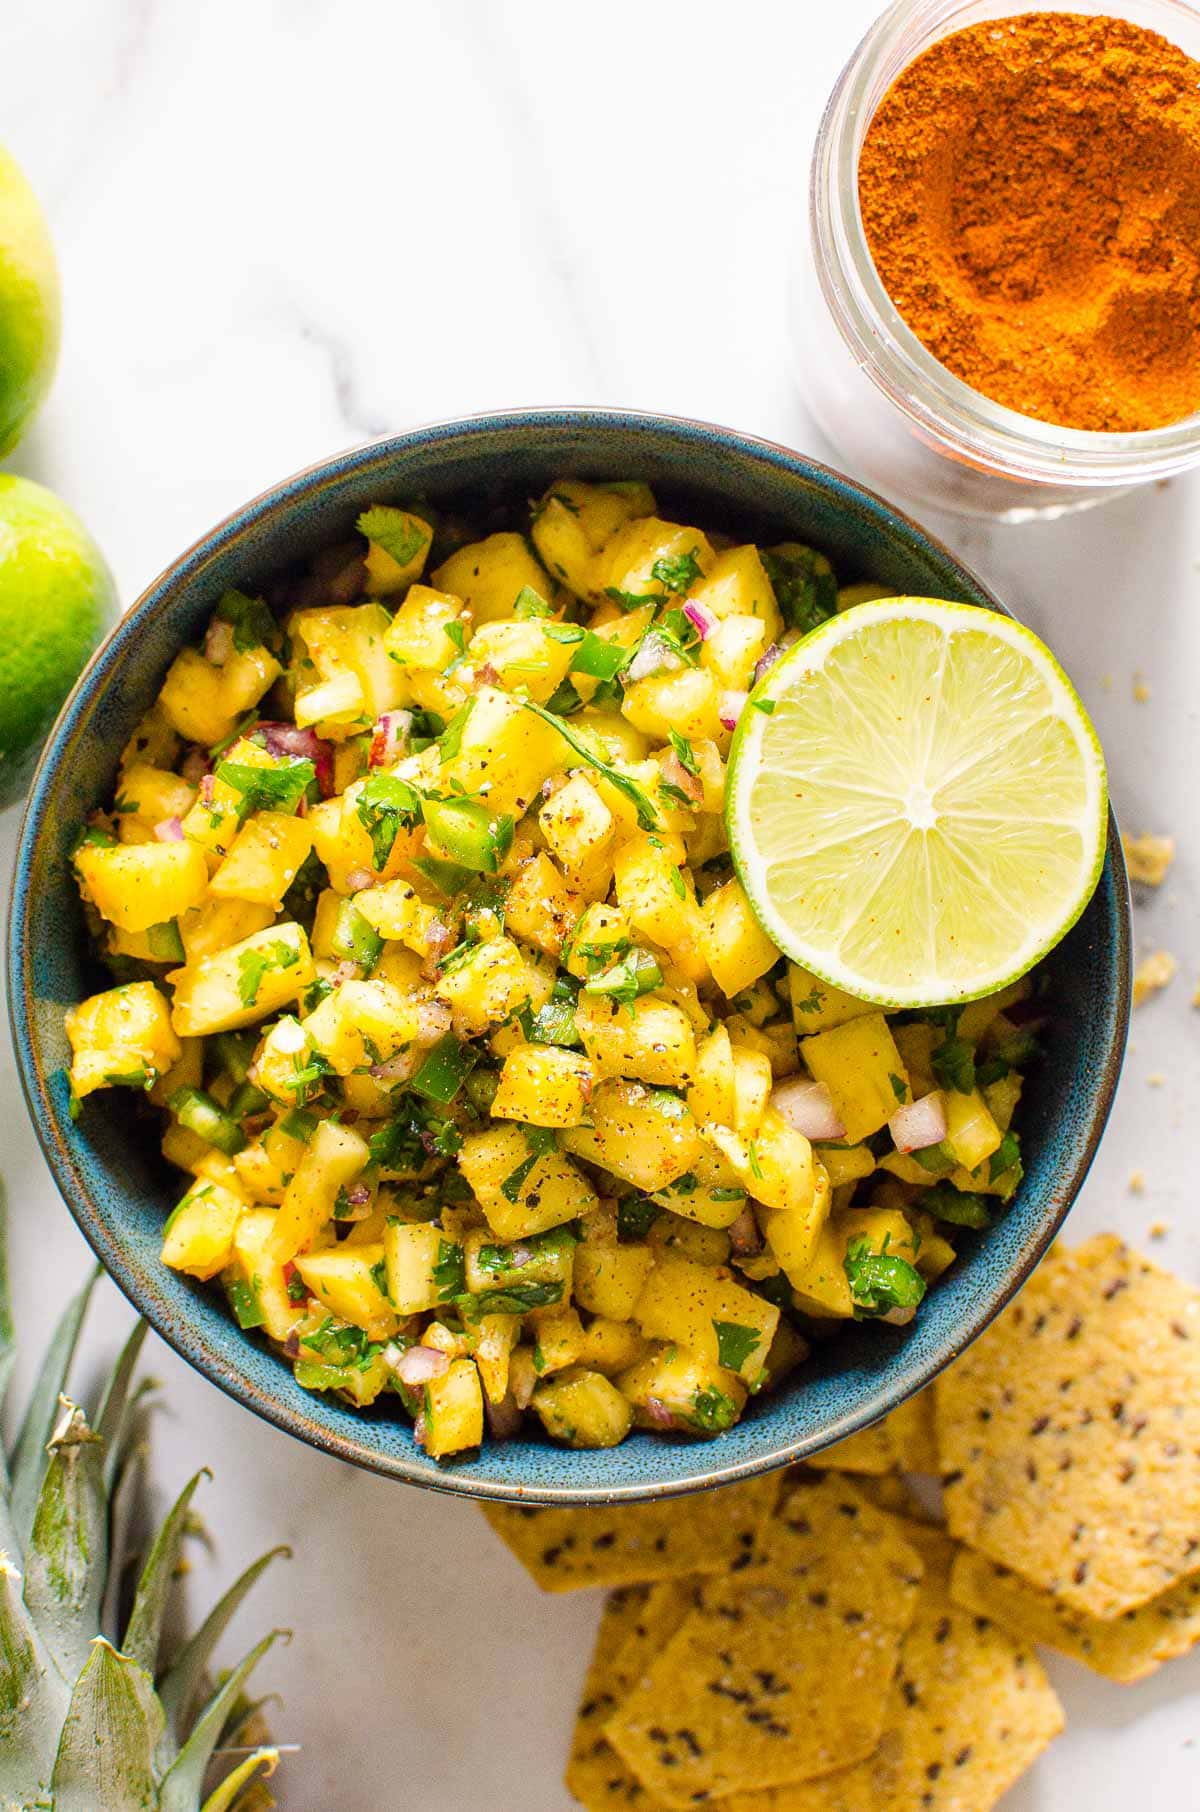 Pineapple jalapeno salsa in a bowl garnished with lime and chips.